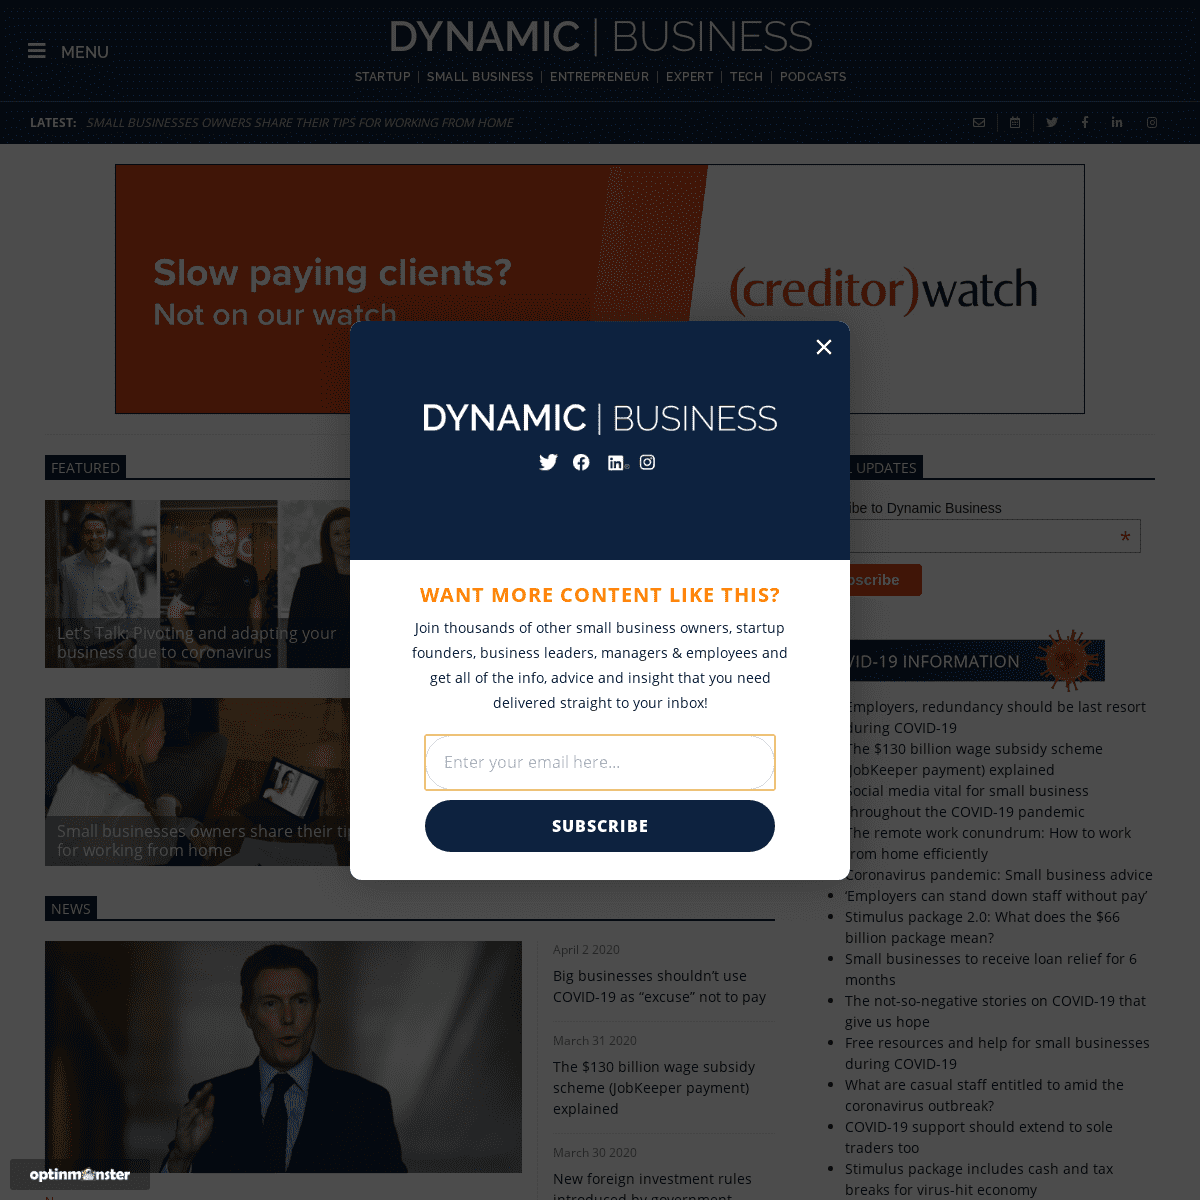 A complete backup of dynamicbusiness.com.au